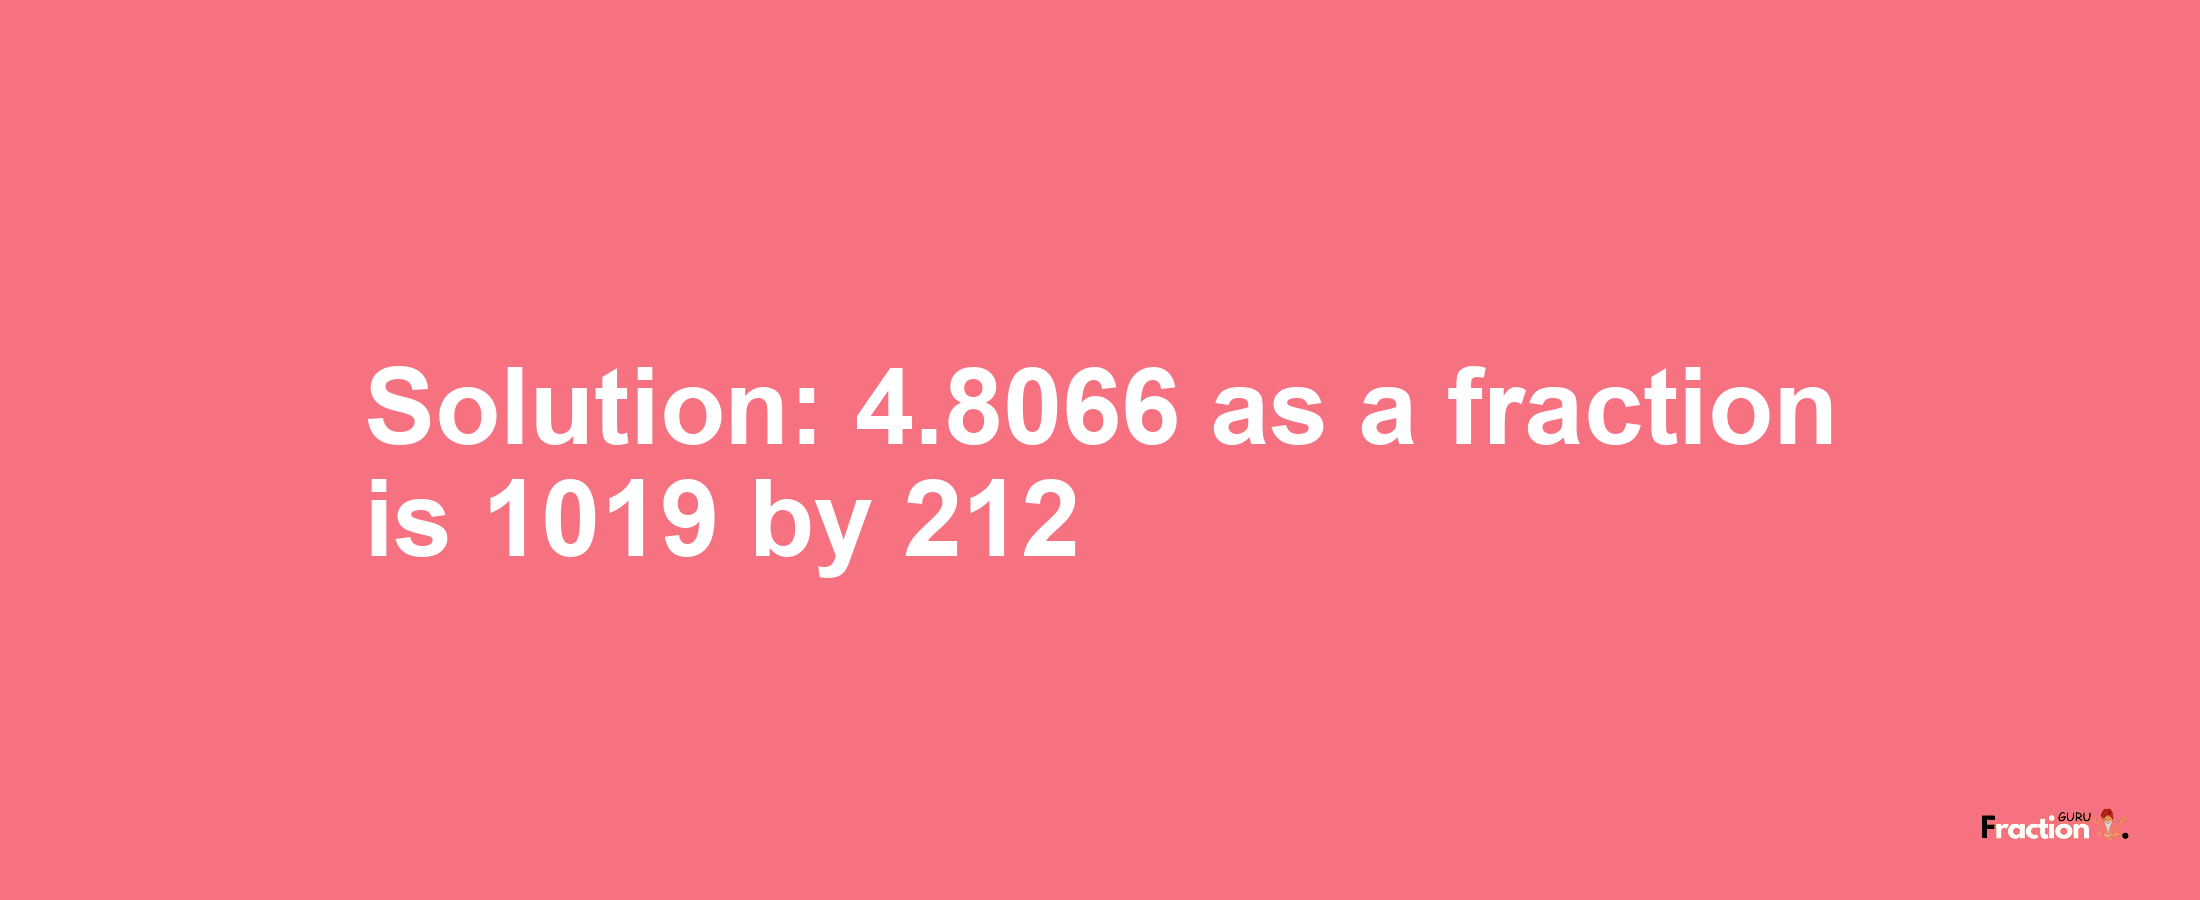 Solution:4.8066 as a fraction is 1019/212